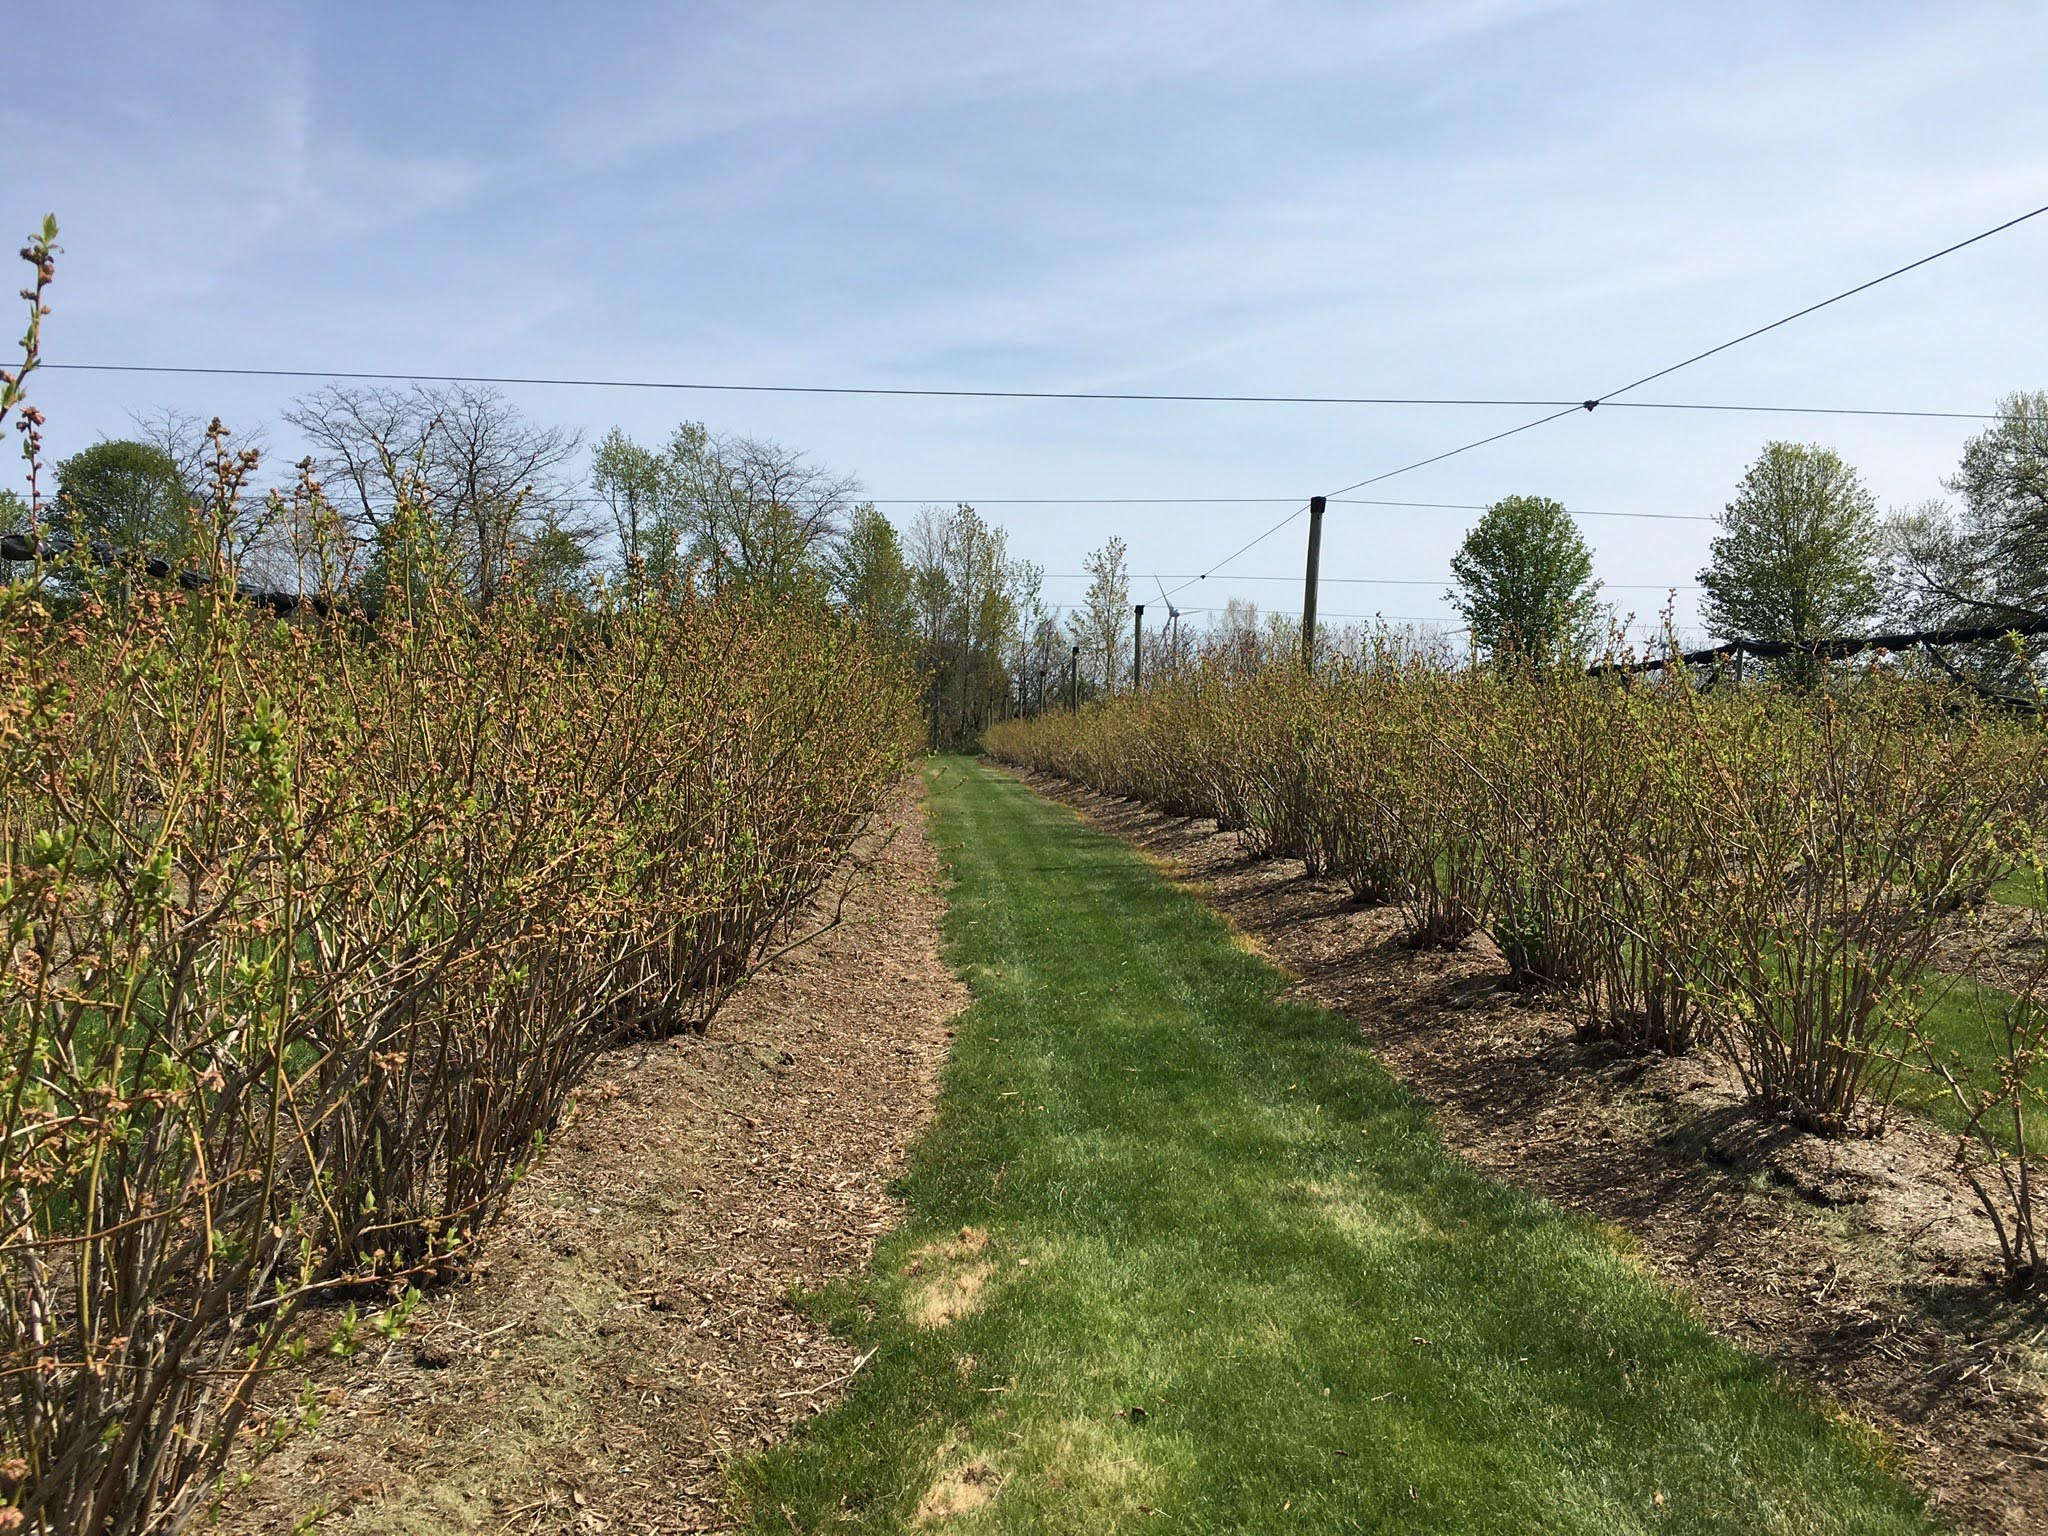 Commercial highbush blueberry farm with mowed path between plants that have mulch around the base